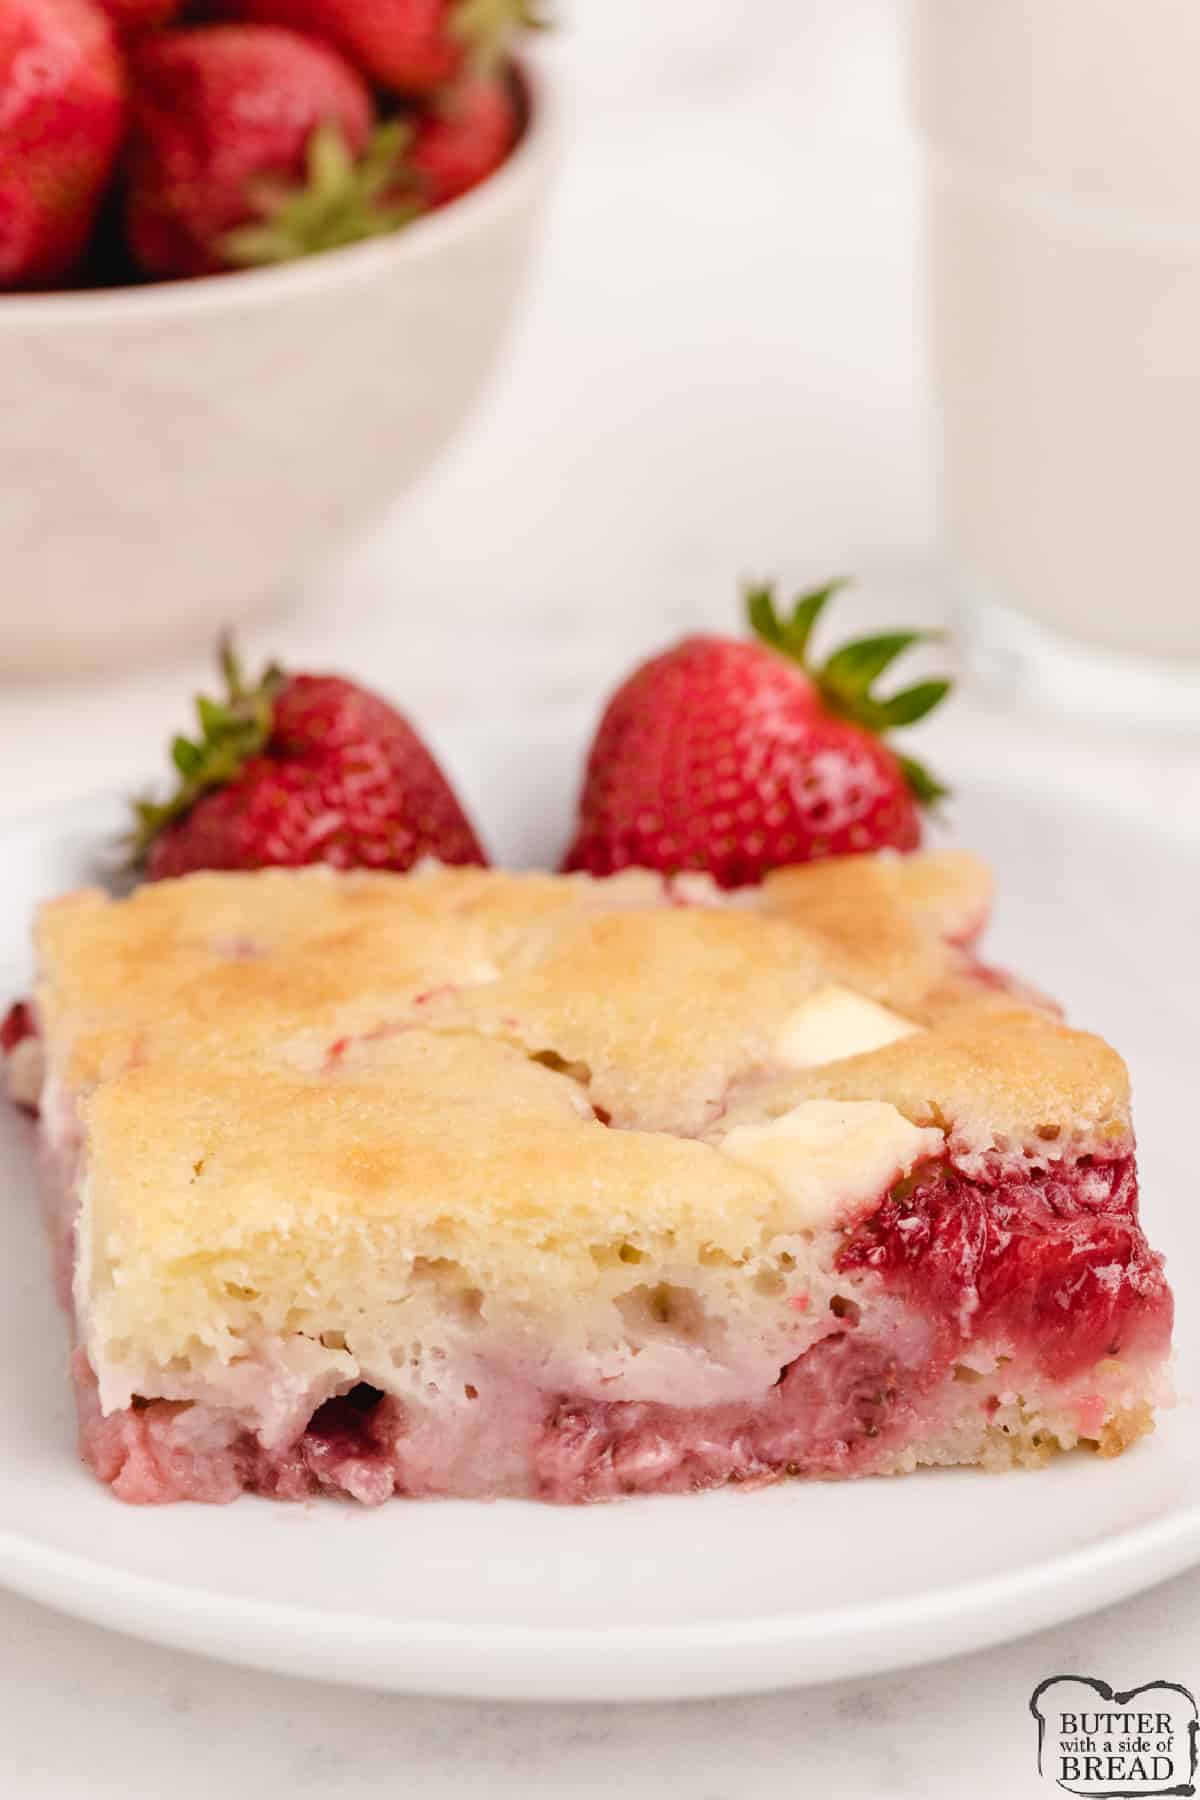 Strawberry Cream Cheese Cobbler made from scratch with fresh strawberries and bits of cream cheese. Sweet strawberry dessert that is delicious all year long! 